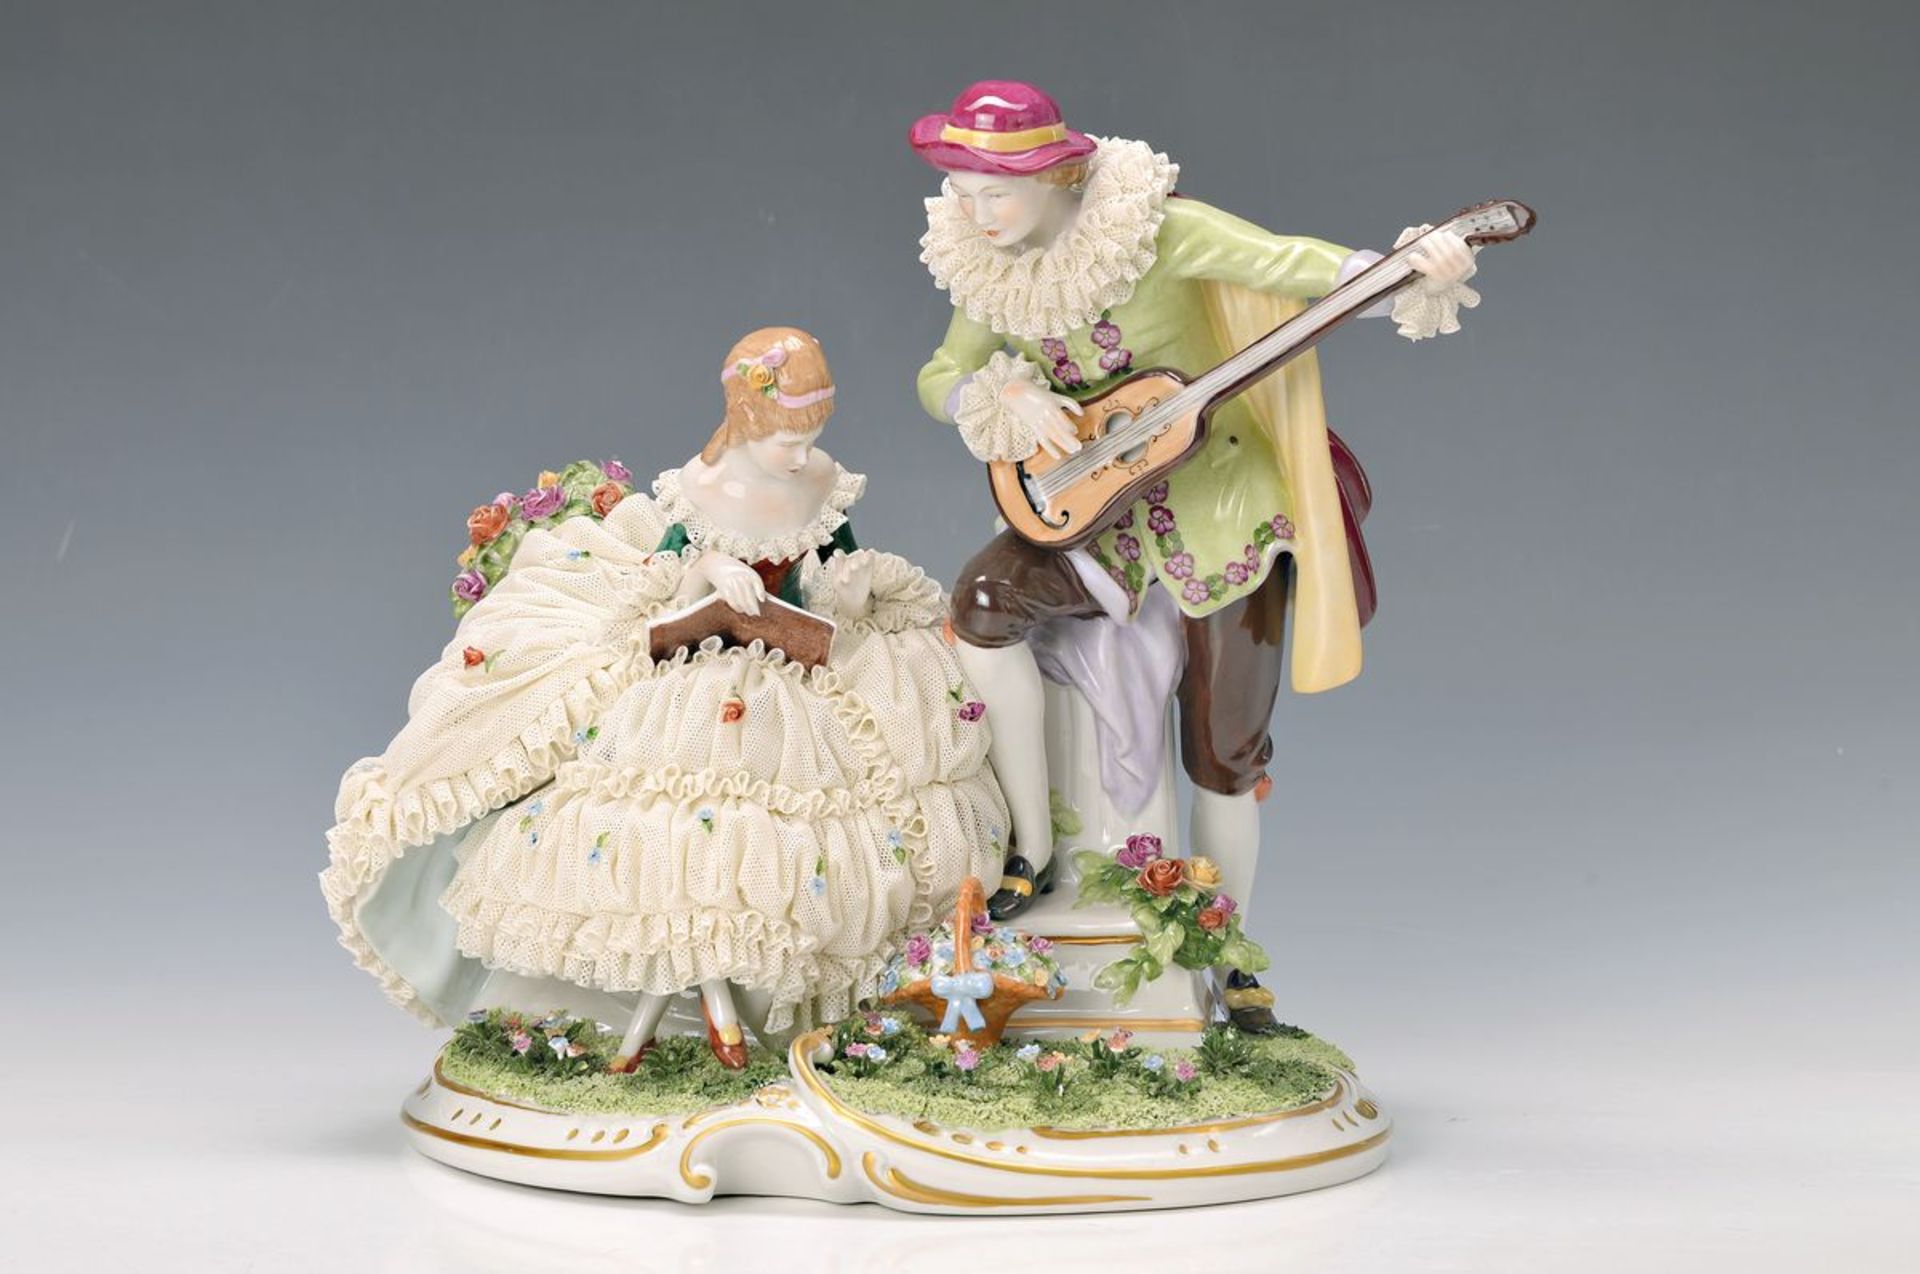 porcelain group, Unterweissbach, 20th c., lute player and singer in style of the Rococo, painted